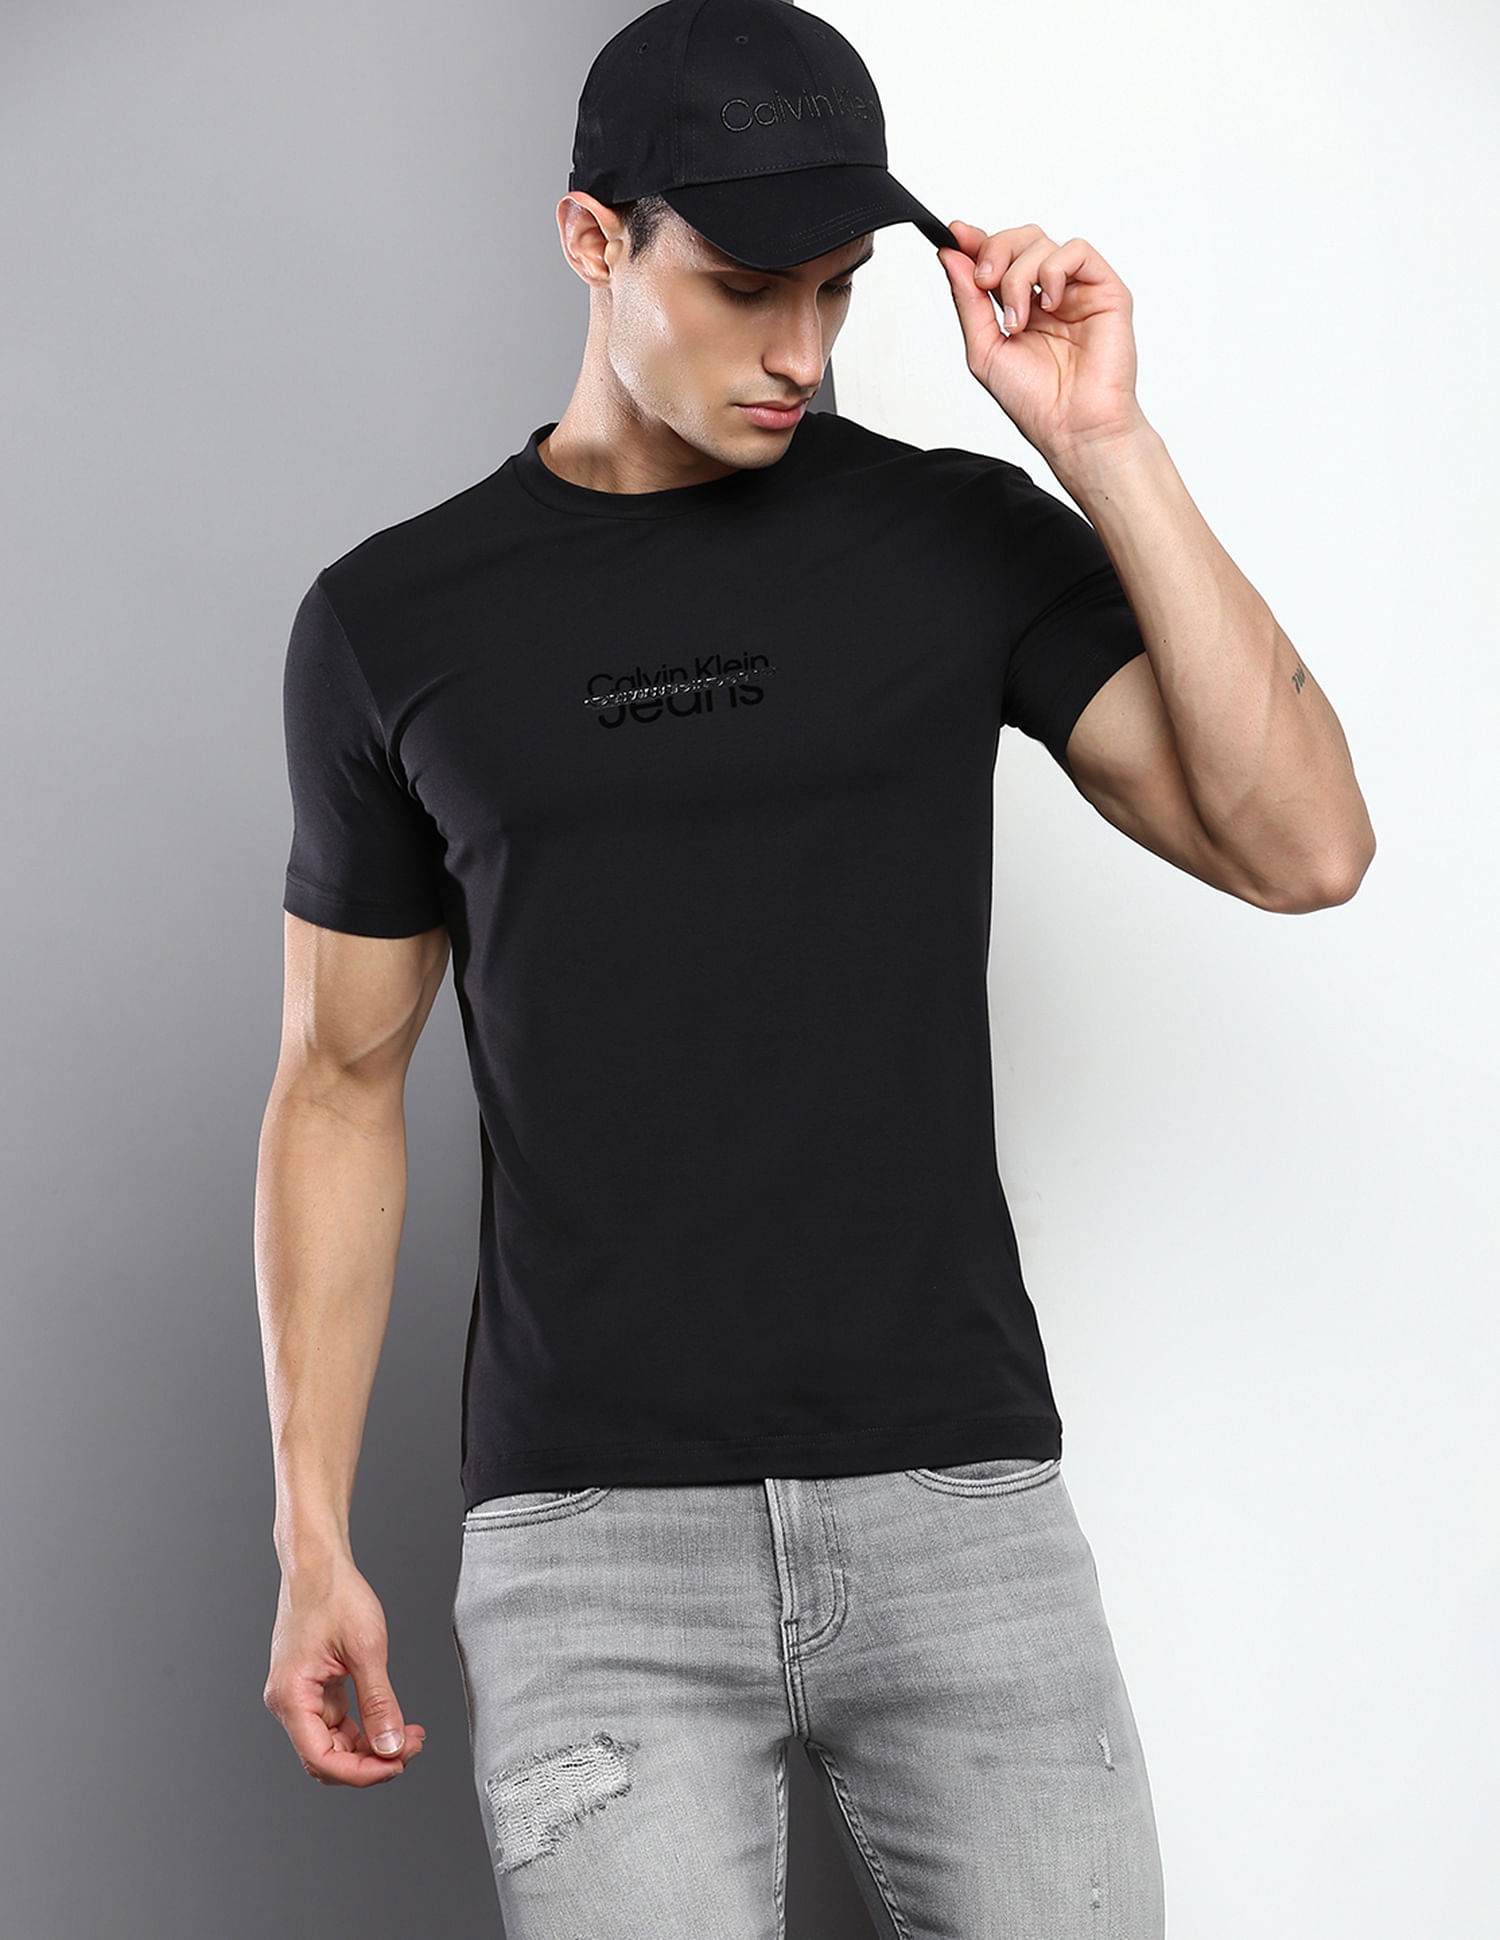 CALVIN KLEIN JEANS - Men's T-shirt with disrupted logo - black